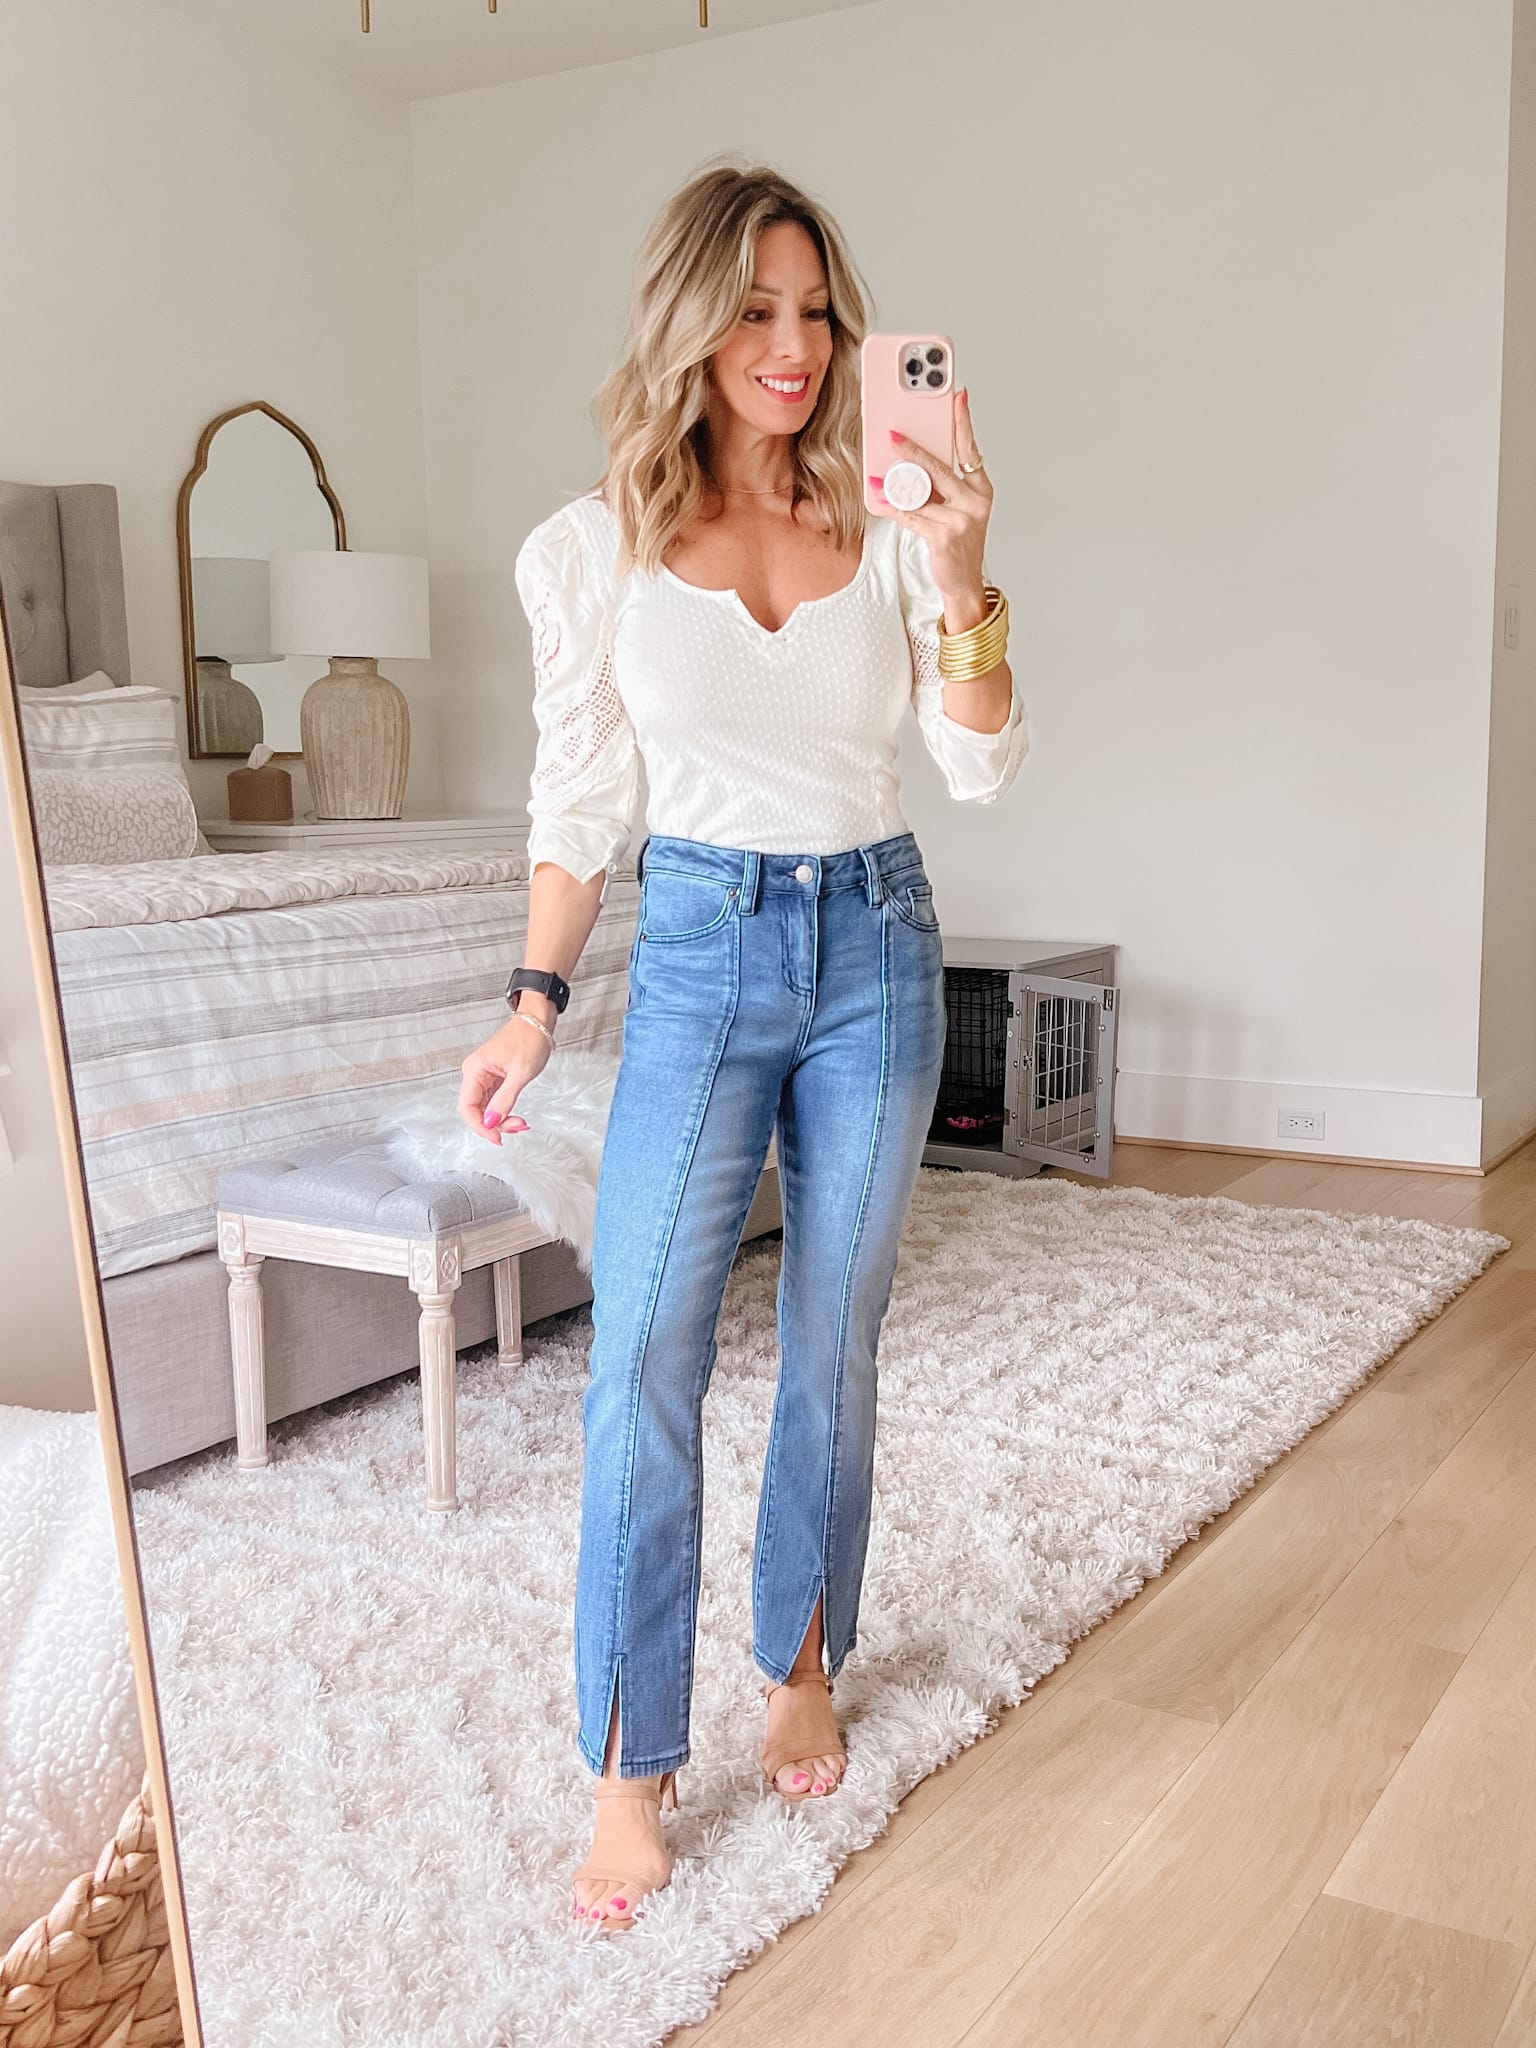 White Puff Sleeve Top, Jeans, Heels 